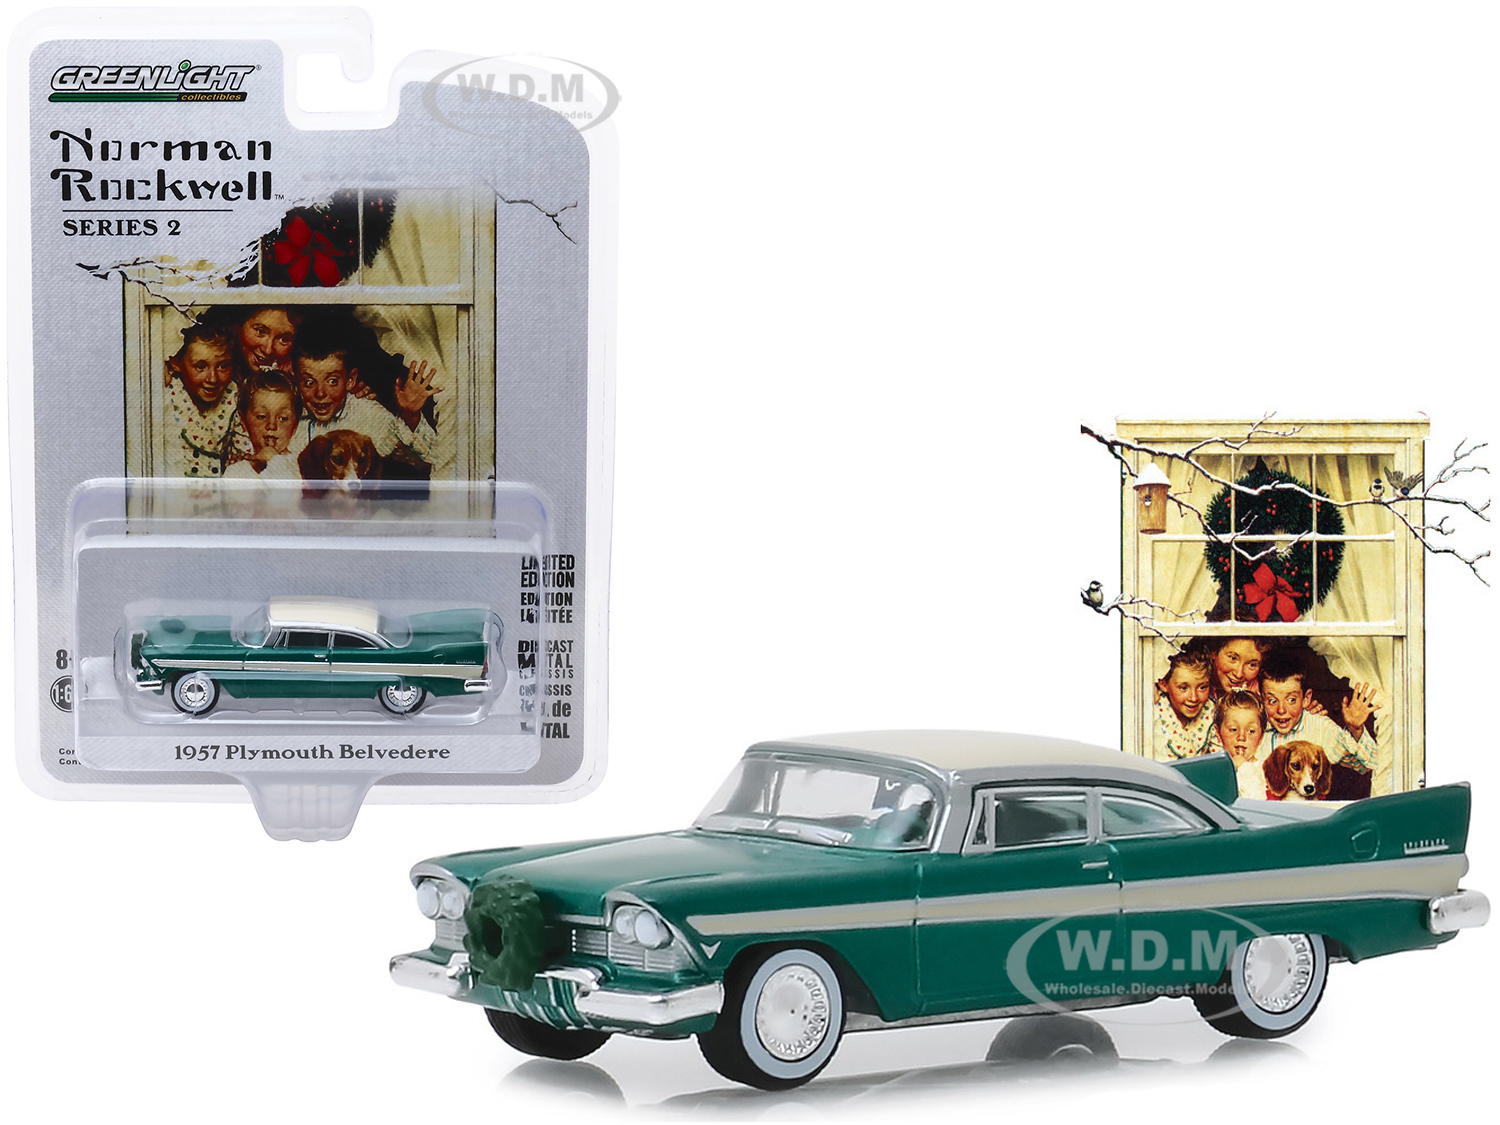 1957 Plymouth Belvedere with Wreath Accessory Green with Cream Top "Norman Rockwell" Series 2 1/64 Diecast Model Car by Greenlight